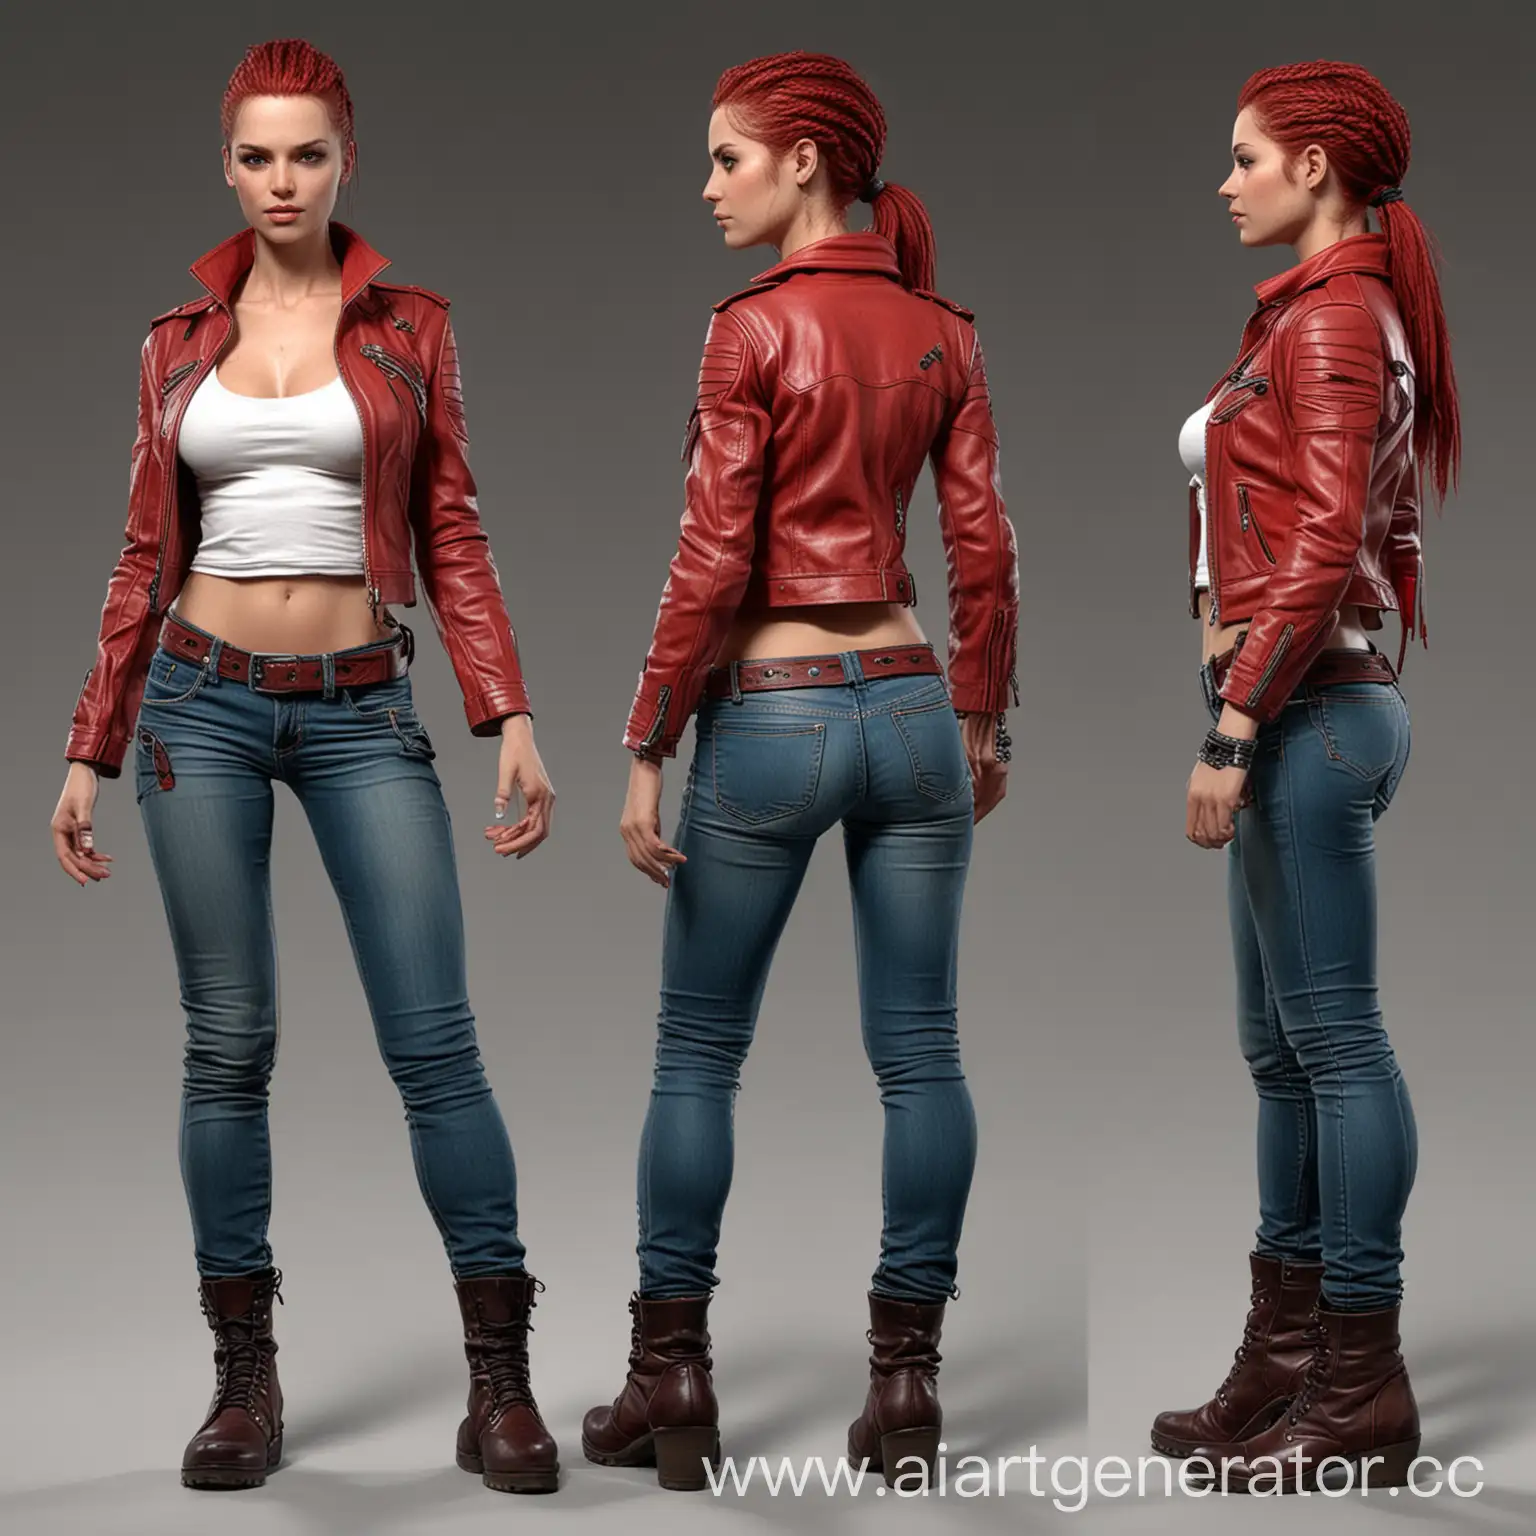 Beautiful-Female-Character-with-Red-Braids-and-Leather-Jacket-in-Dynamic-Lighting